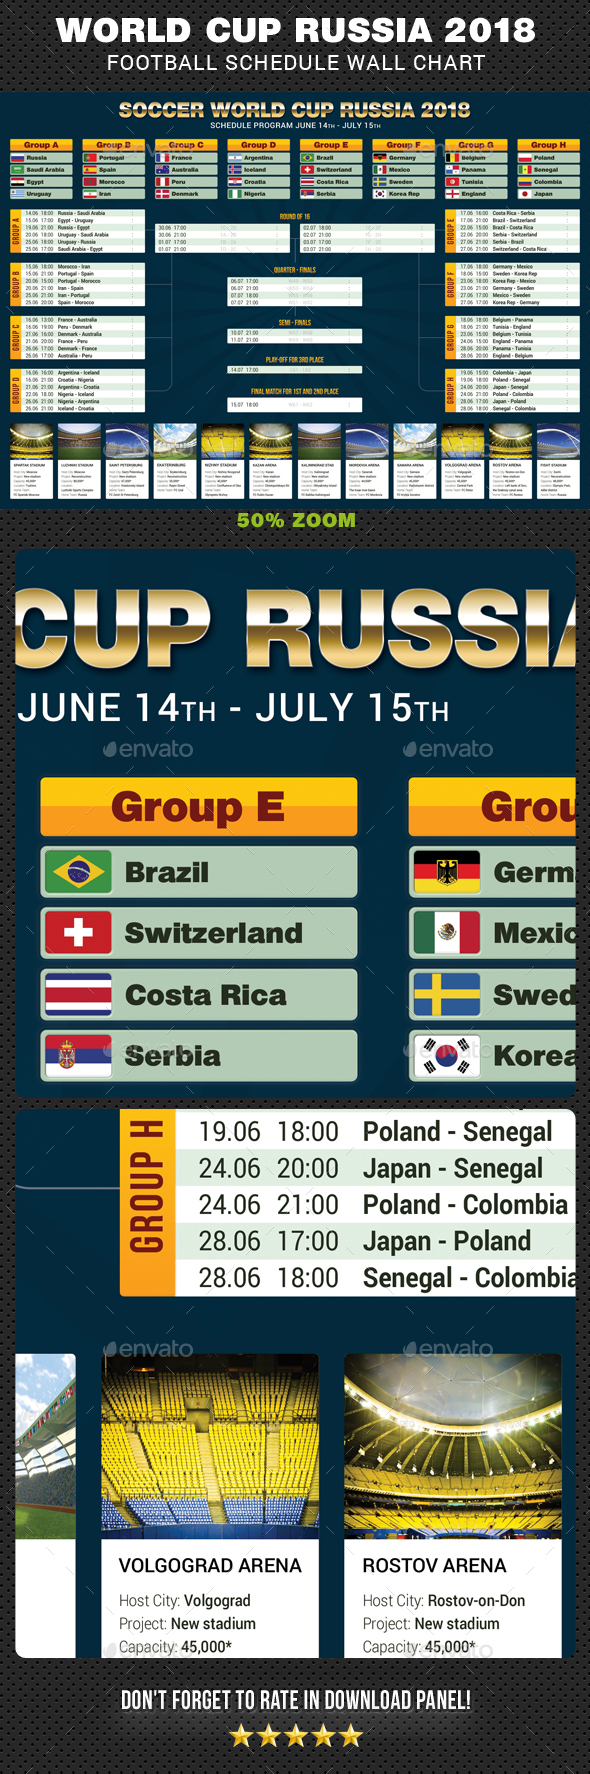 World Cup 2018 Wall Chart Free